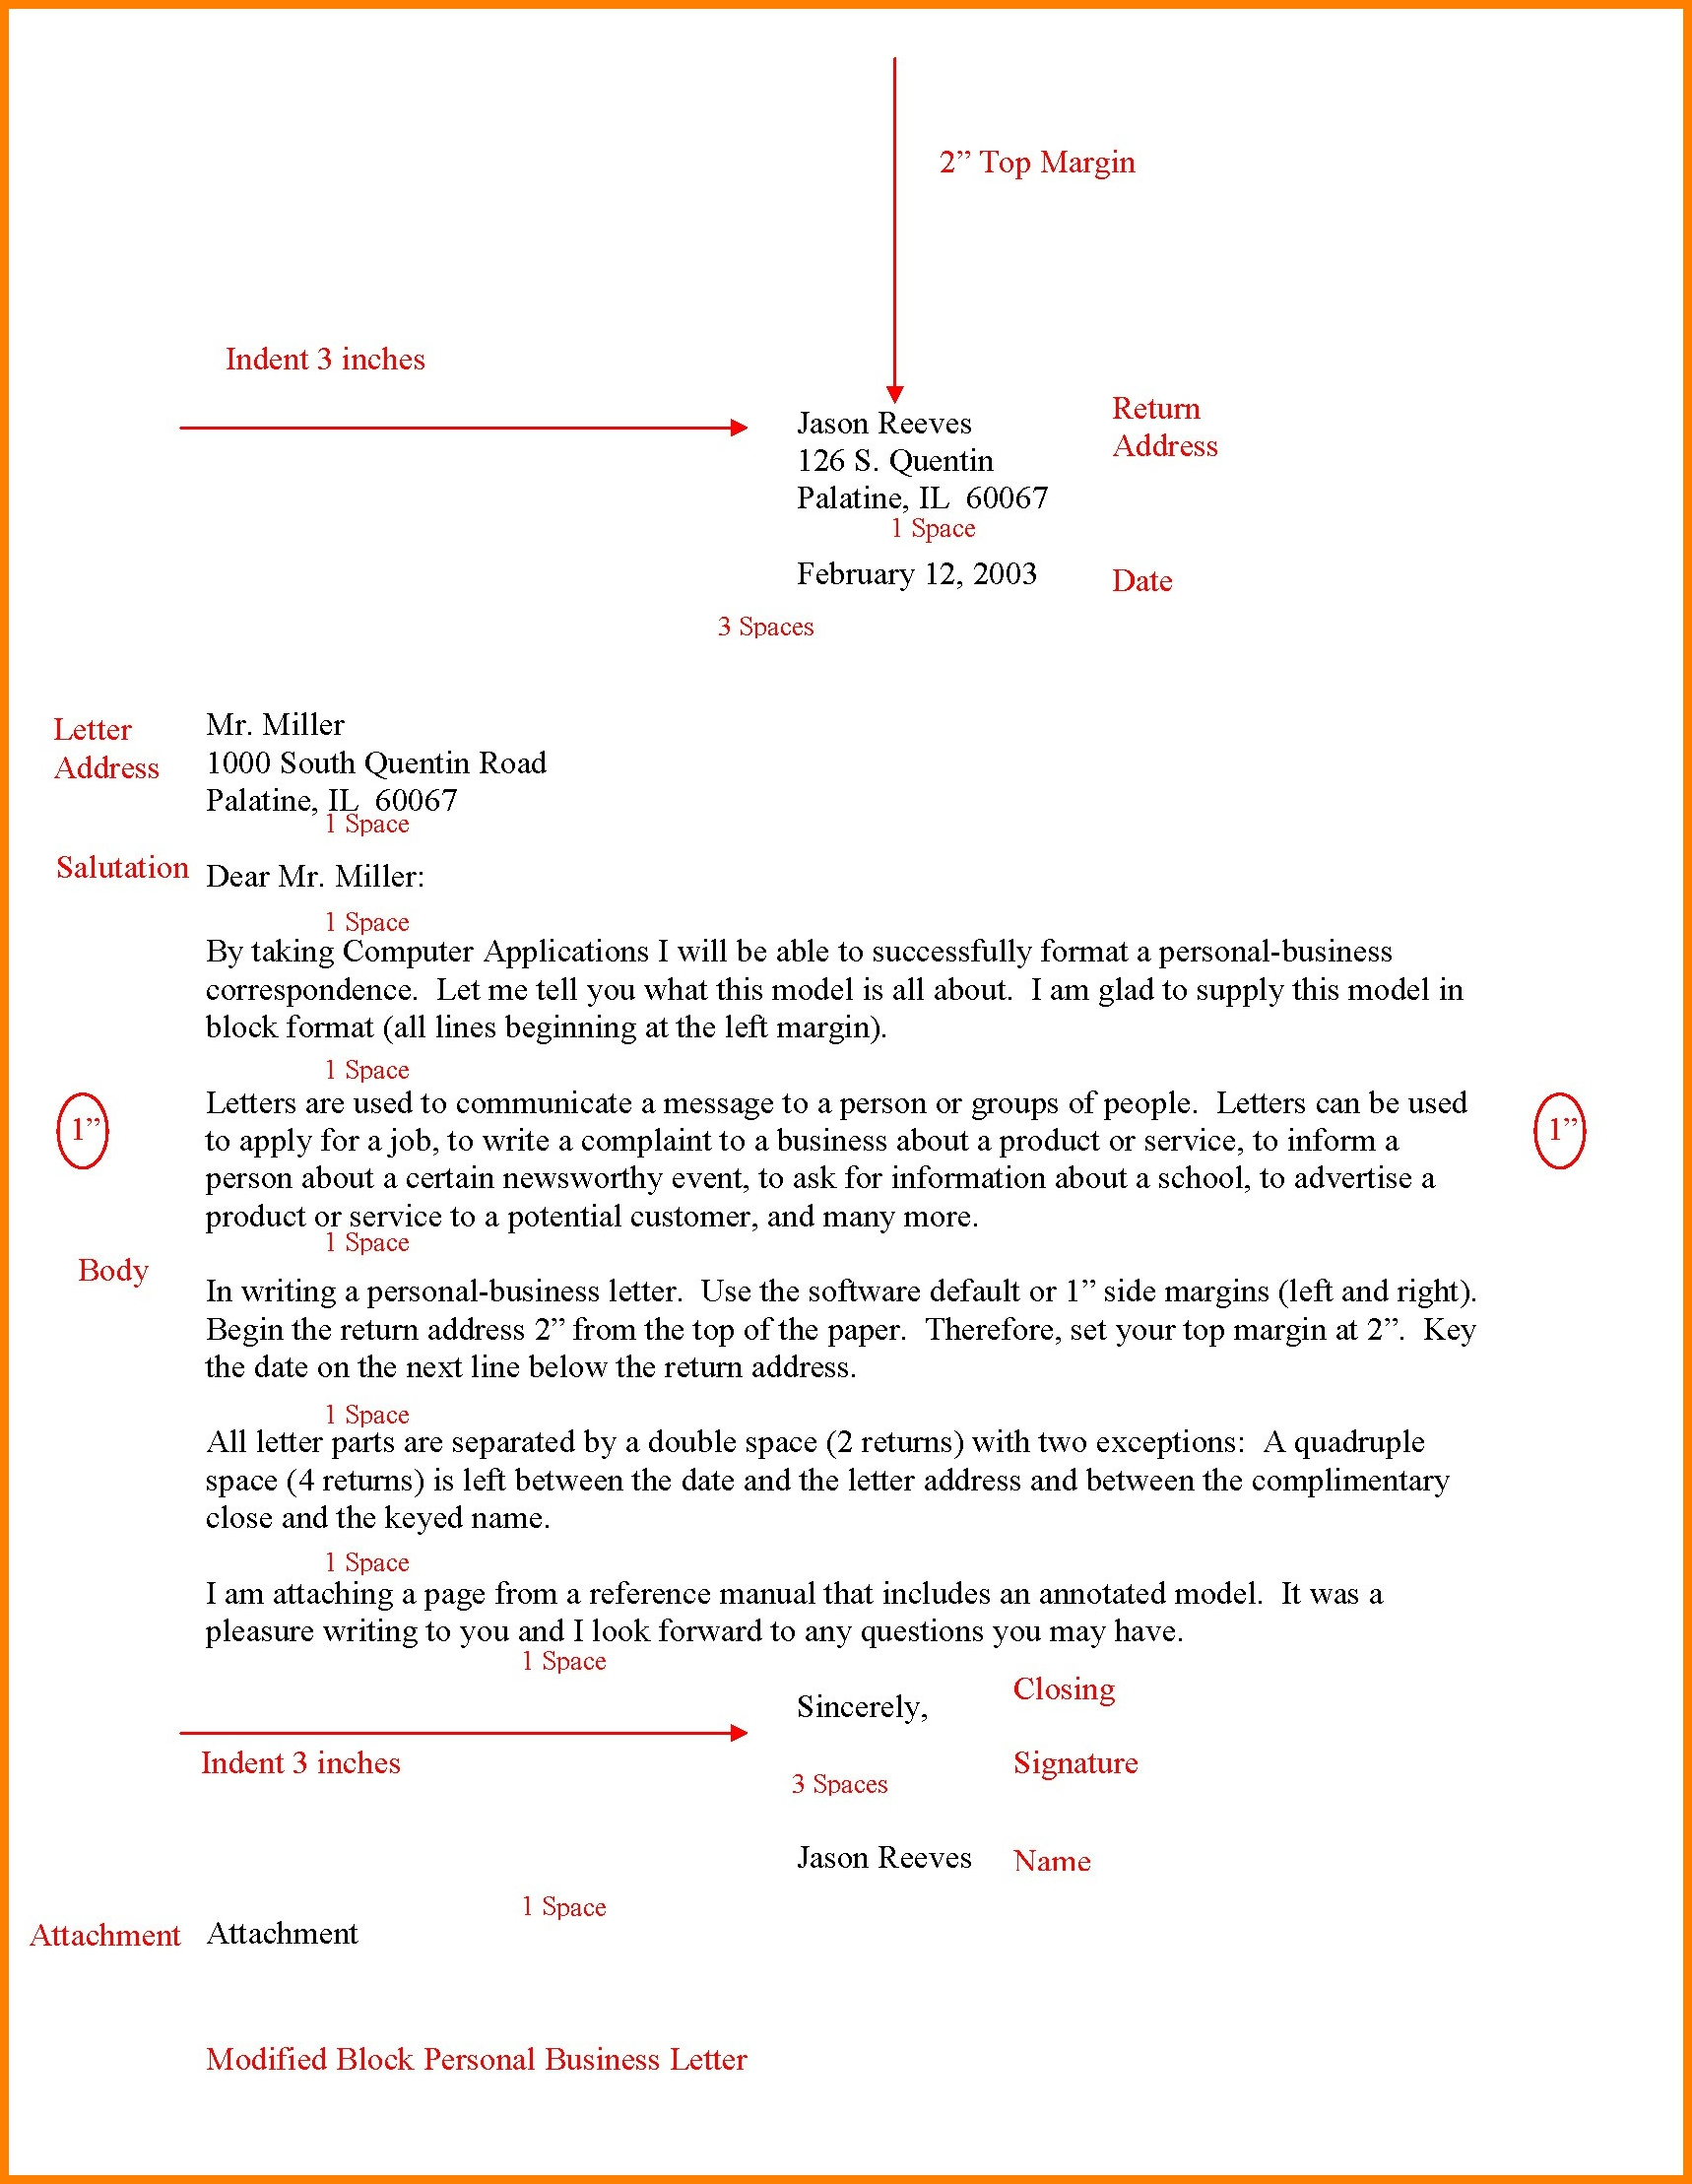 Modified Block Letter | Free Resume Templates Throughout Modified Block Letter Template Word